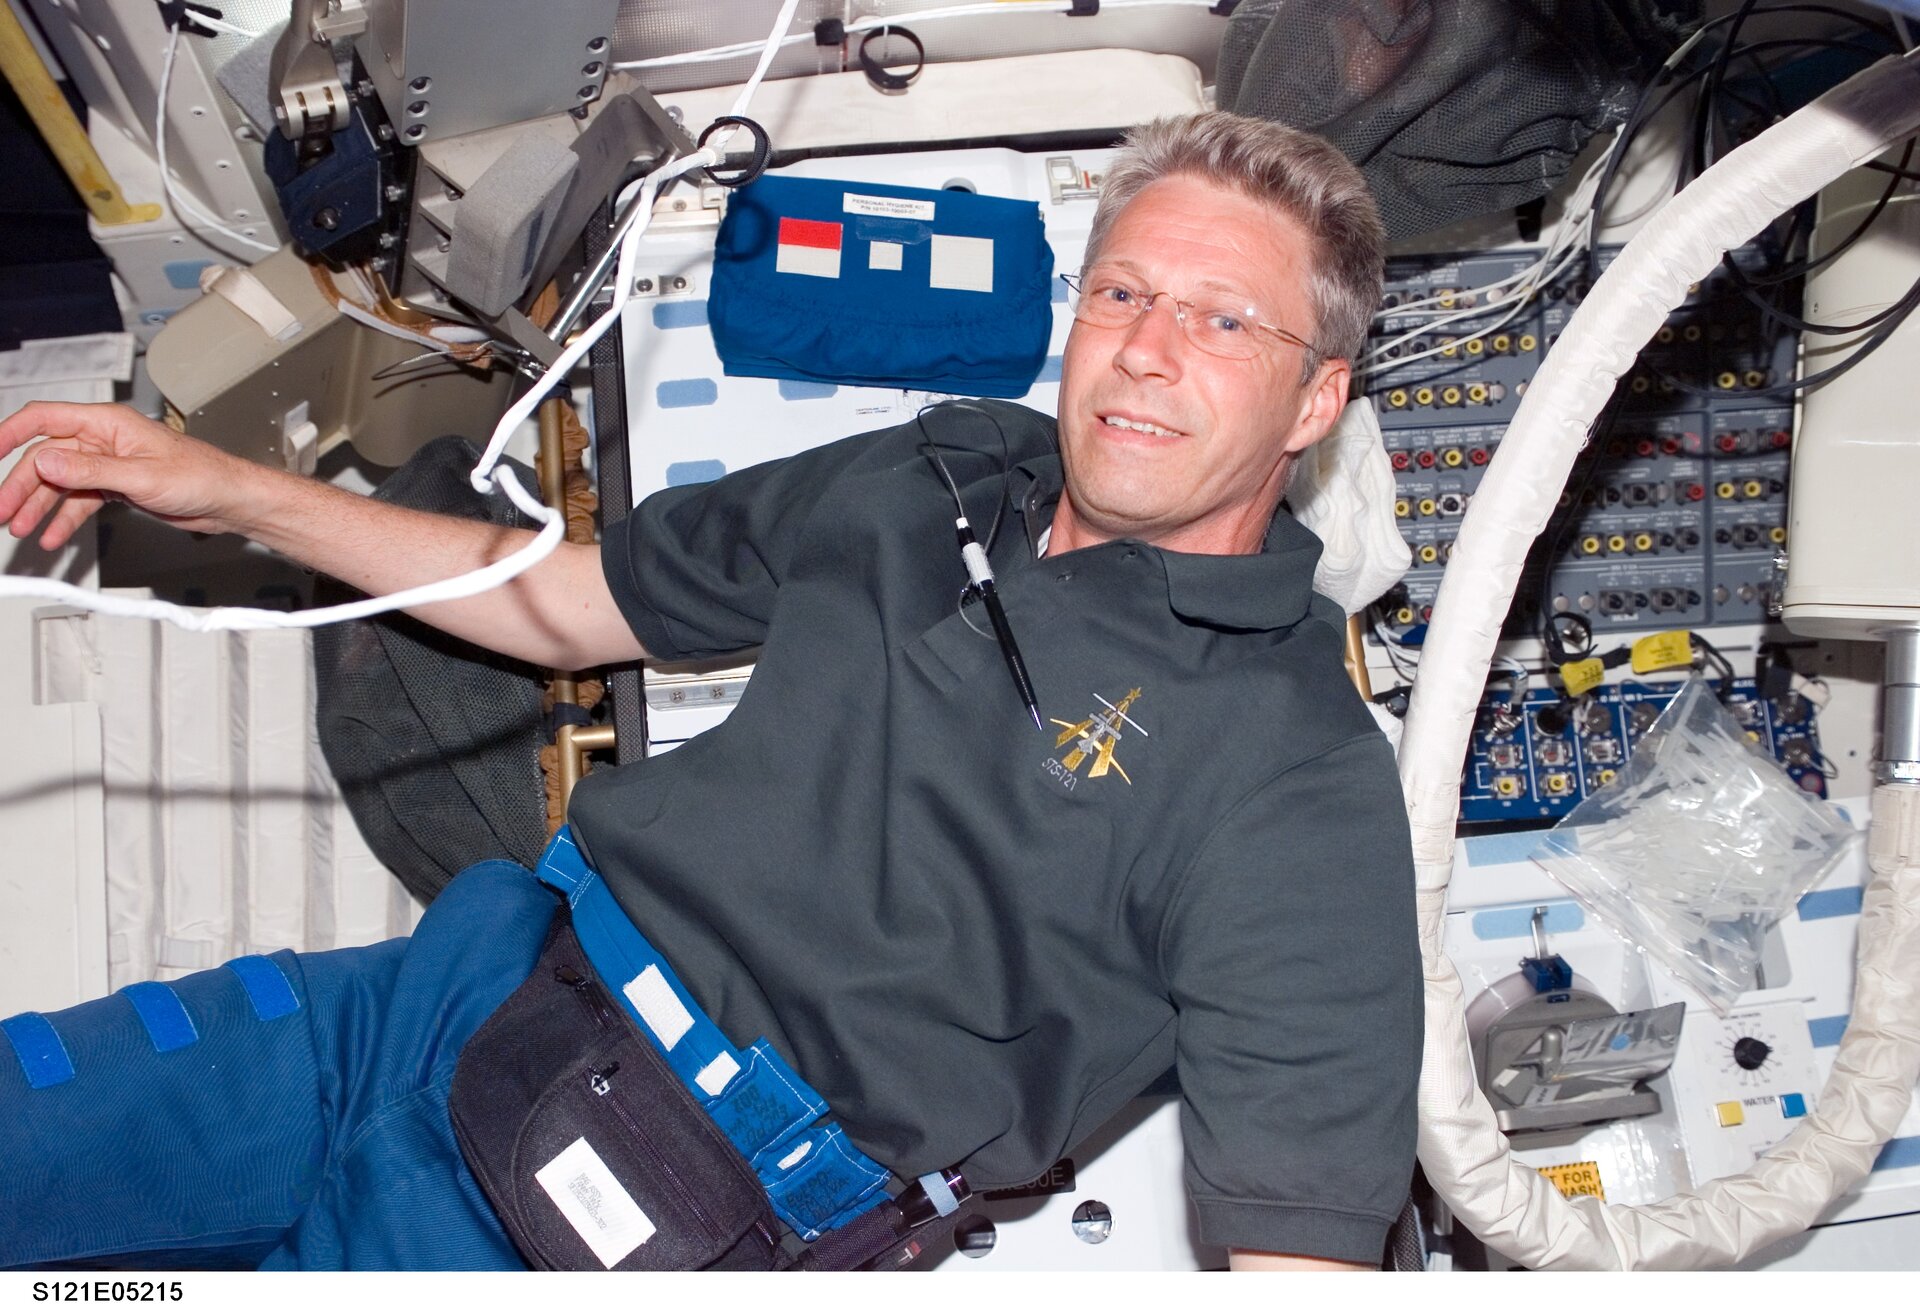 The SkinCare Experiment is uploaded to the ISS during ESA's Astrolab Mission with German ESA astronaut Thomas Reiter